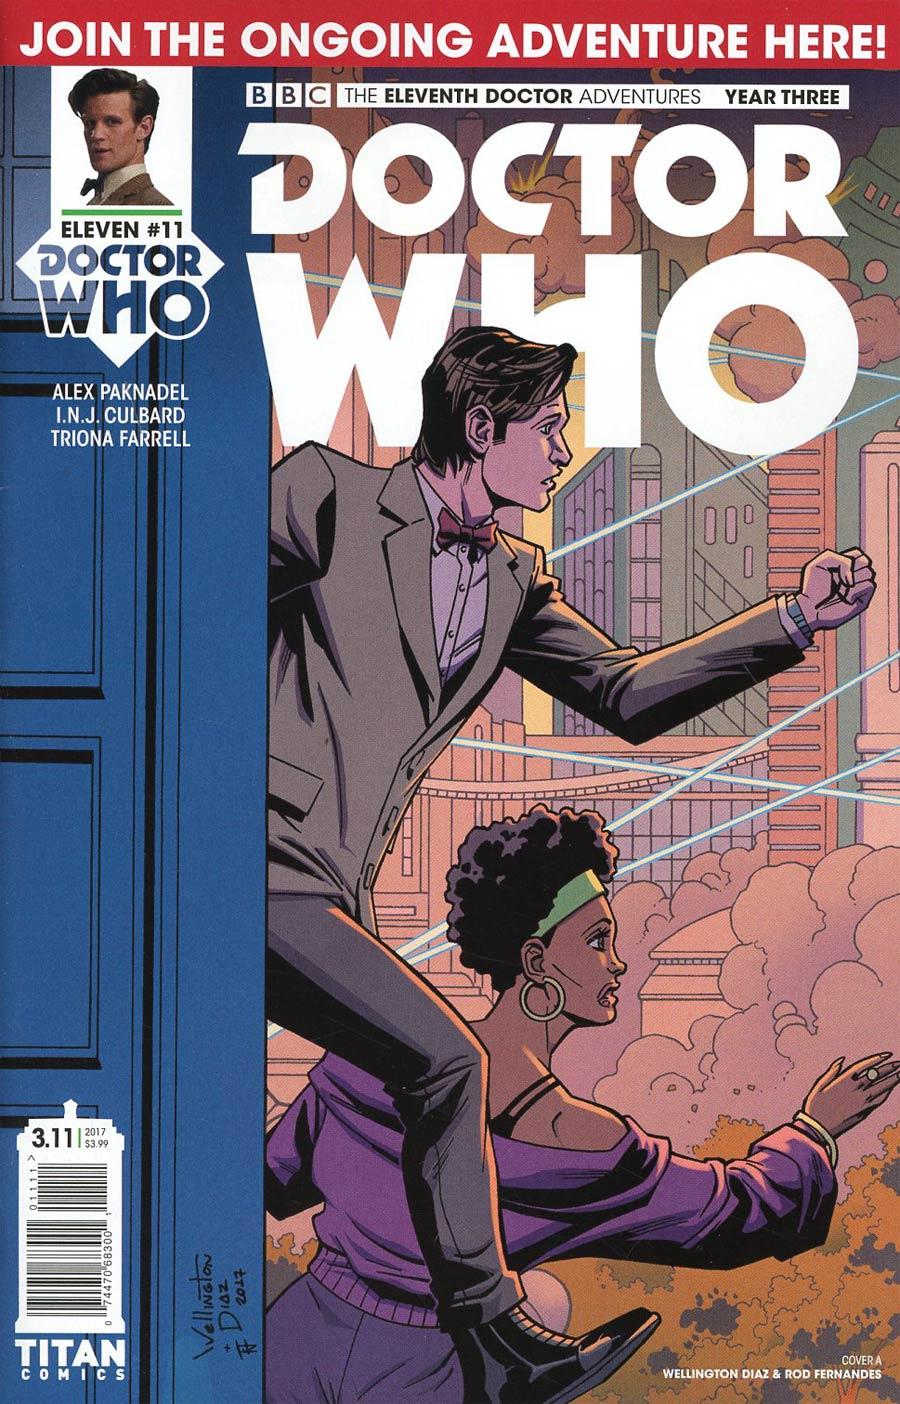 Doctor Who 11th Doctor Year Three Vol. 1 #11